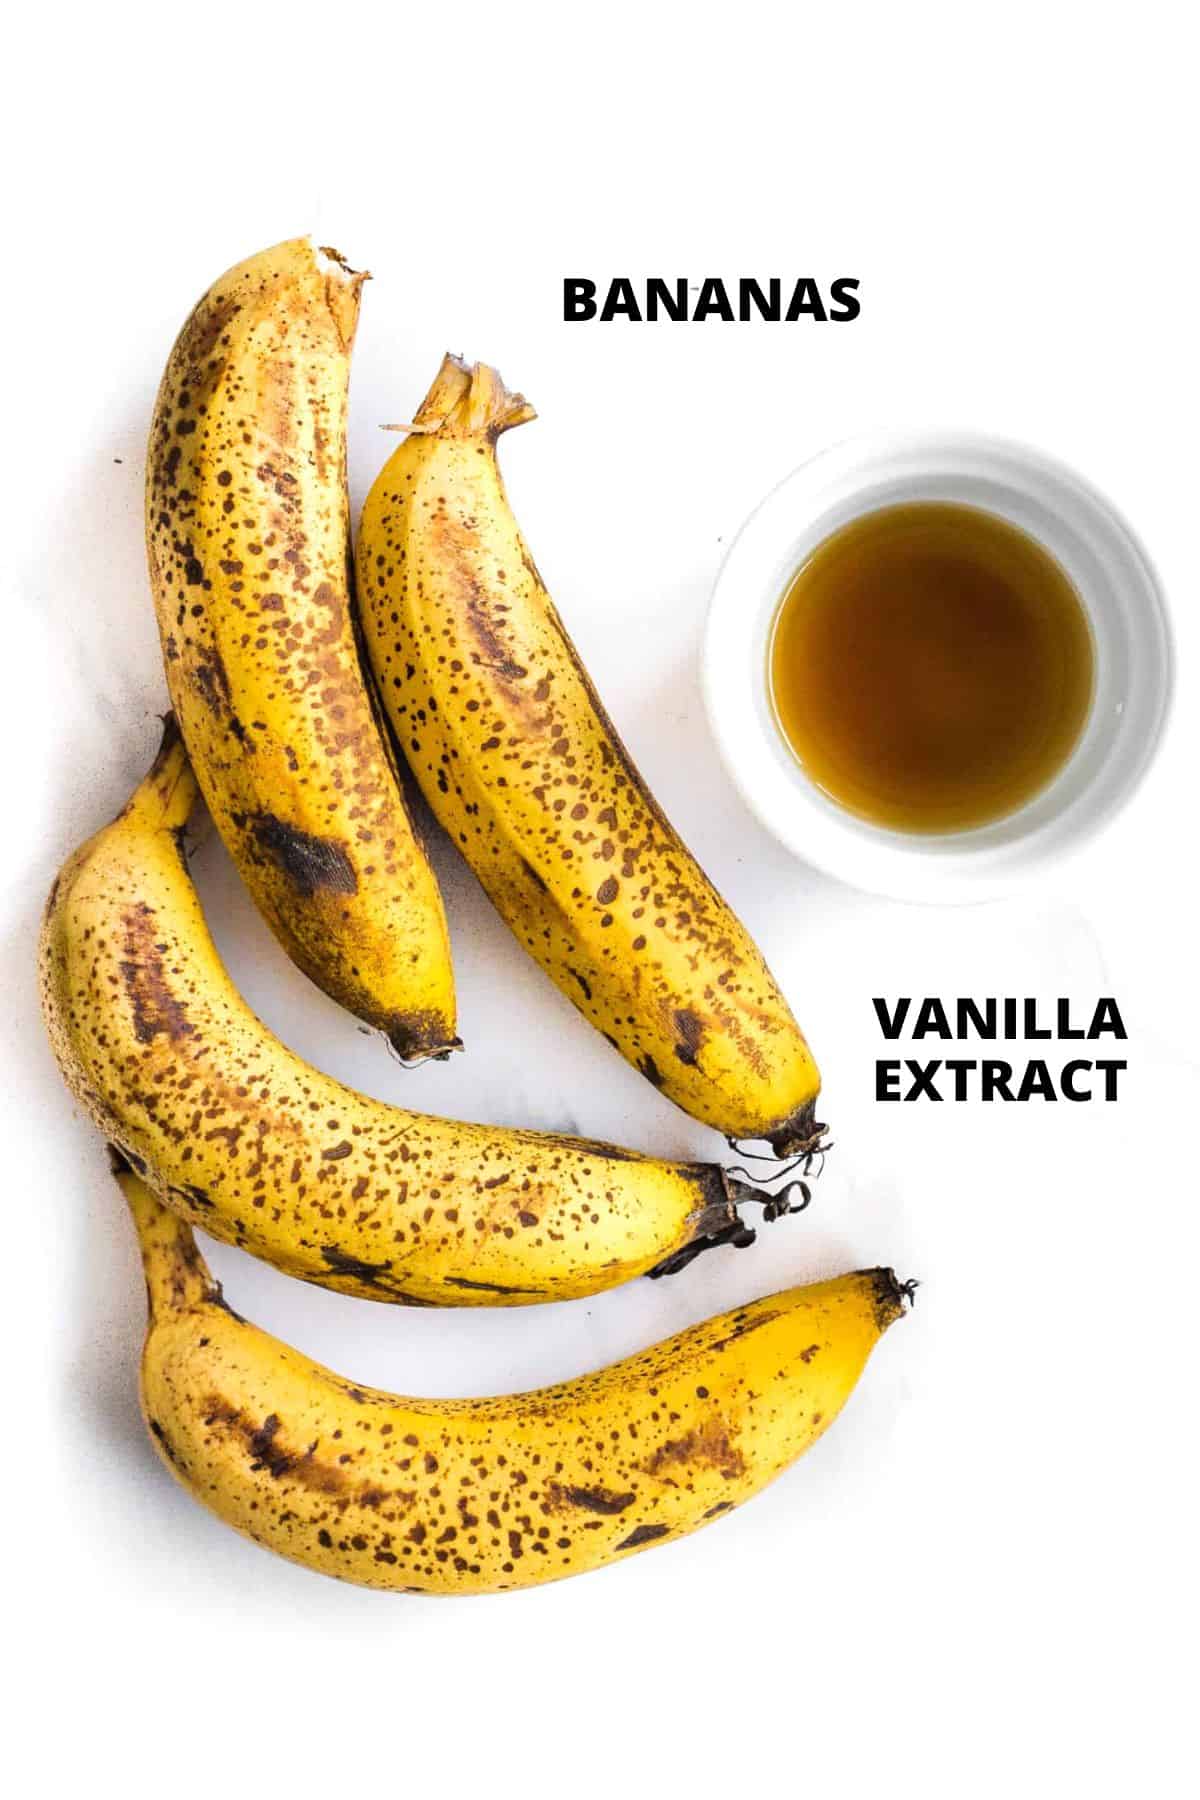 Ingredients for making homemade banana ice cream laid out on marble board.